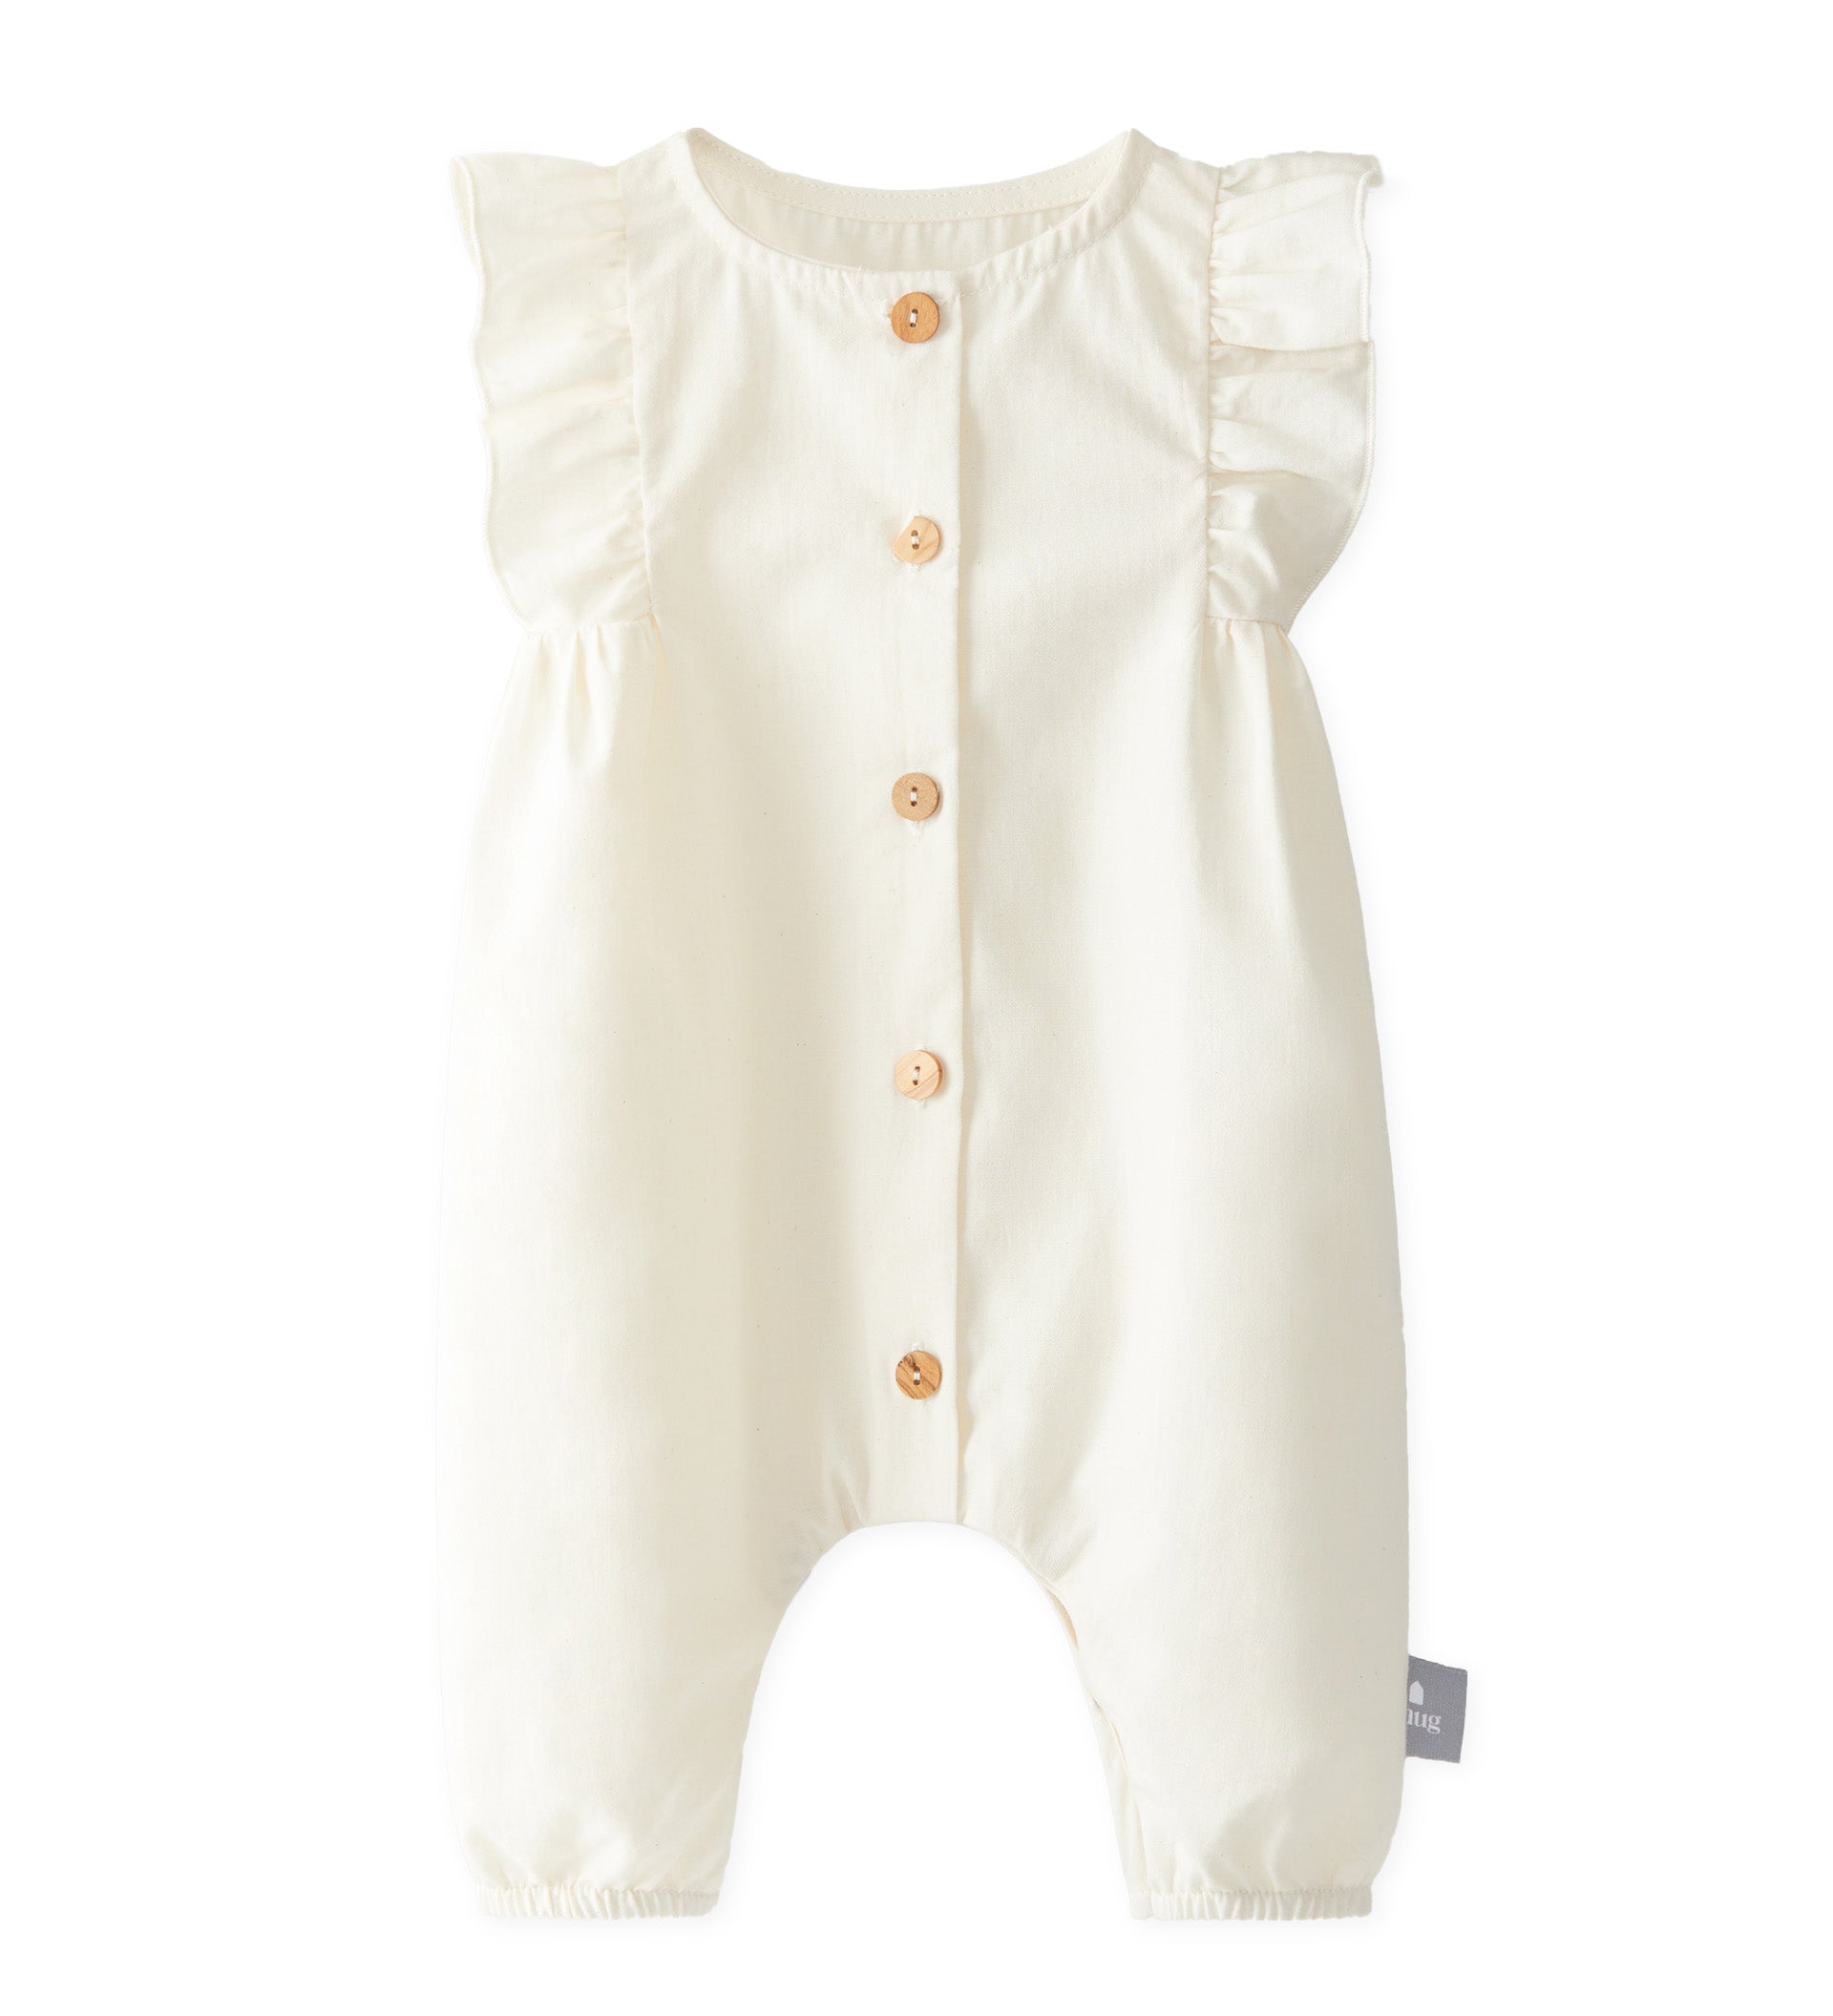 Snug jumpsuit one piece ruffle natural color white